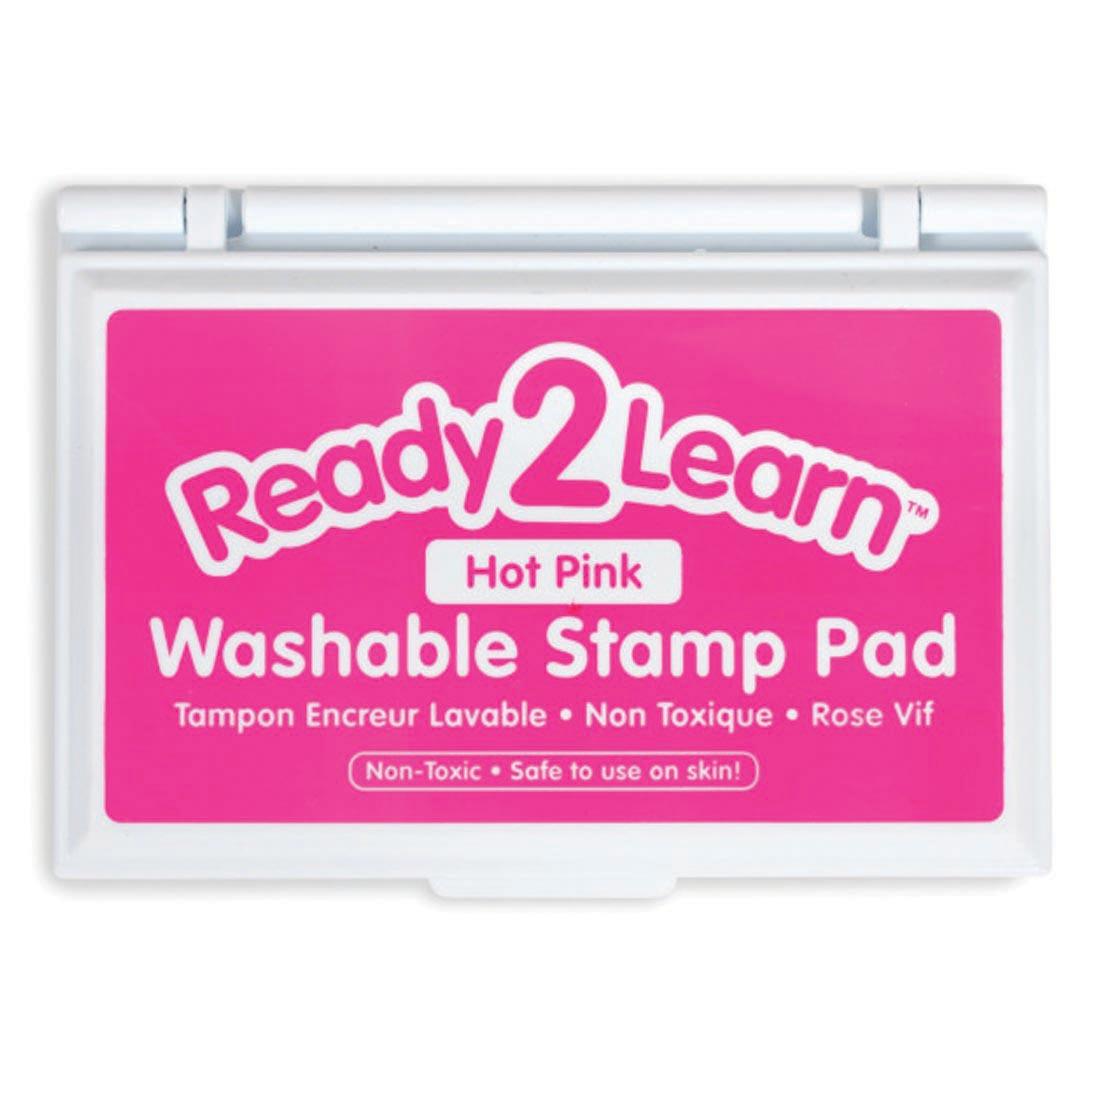 Ready 2 Learn Hot Pink Washable Stamp Pad